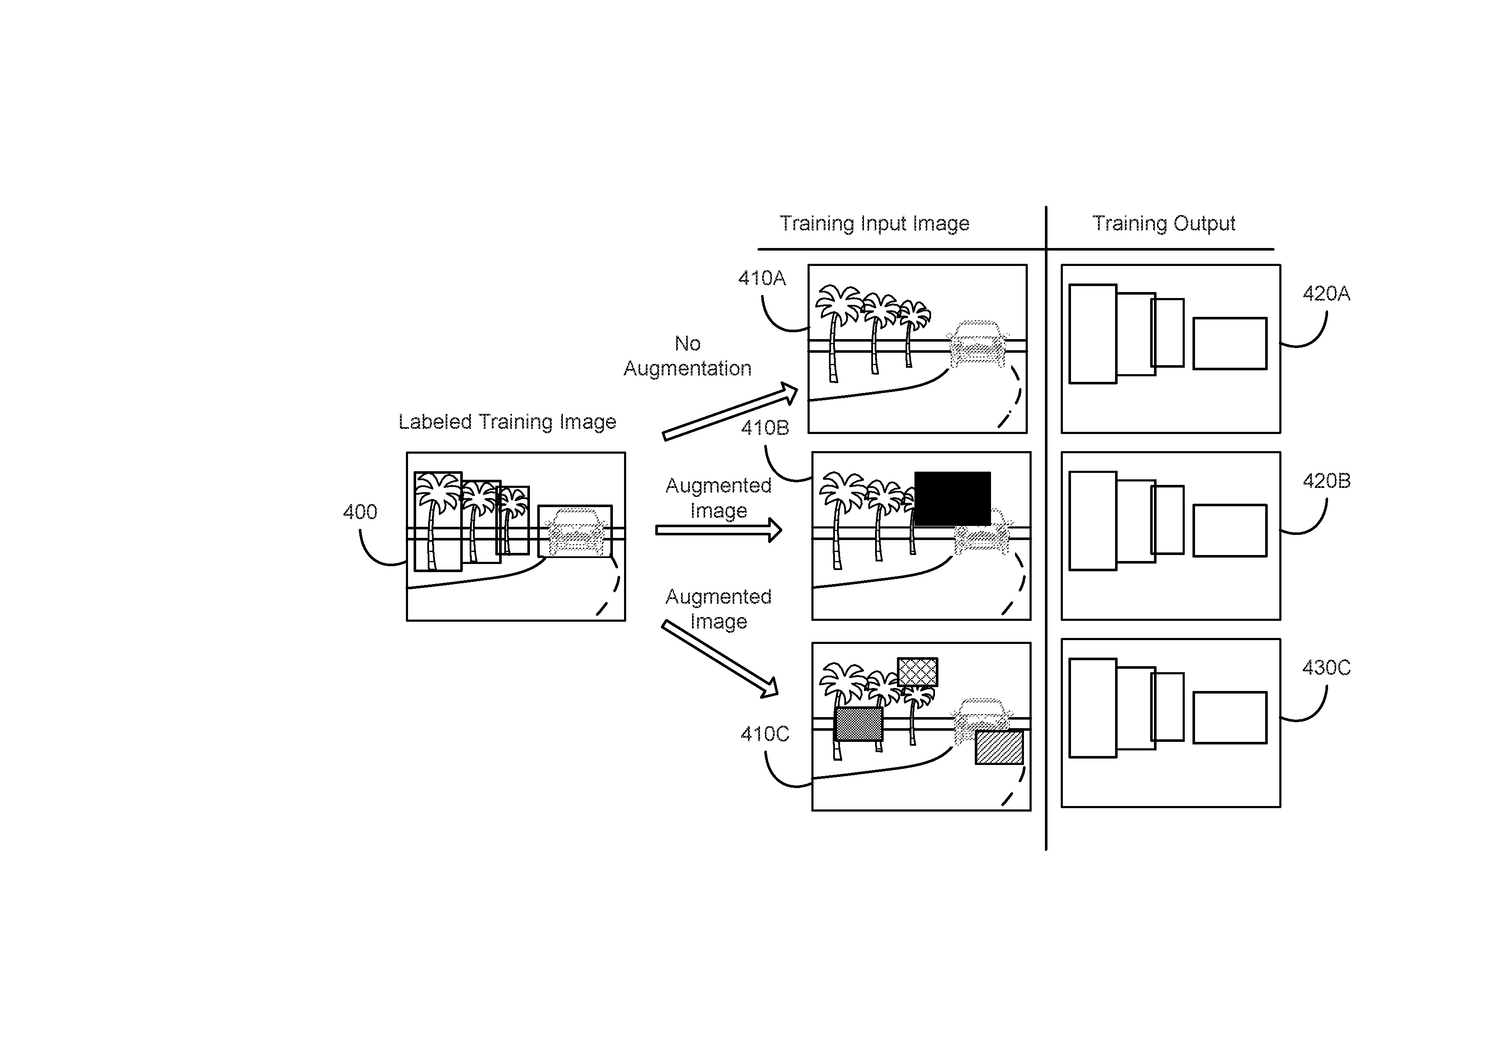 Tesla filed a patent 'System and methods for training machine models with augmented data'